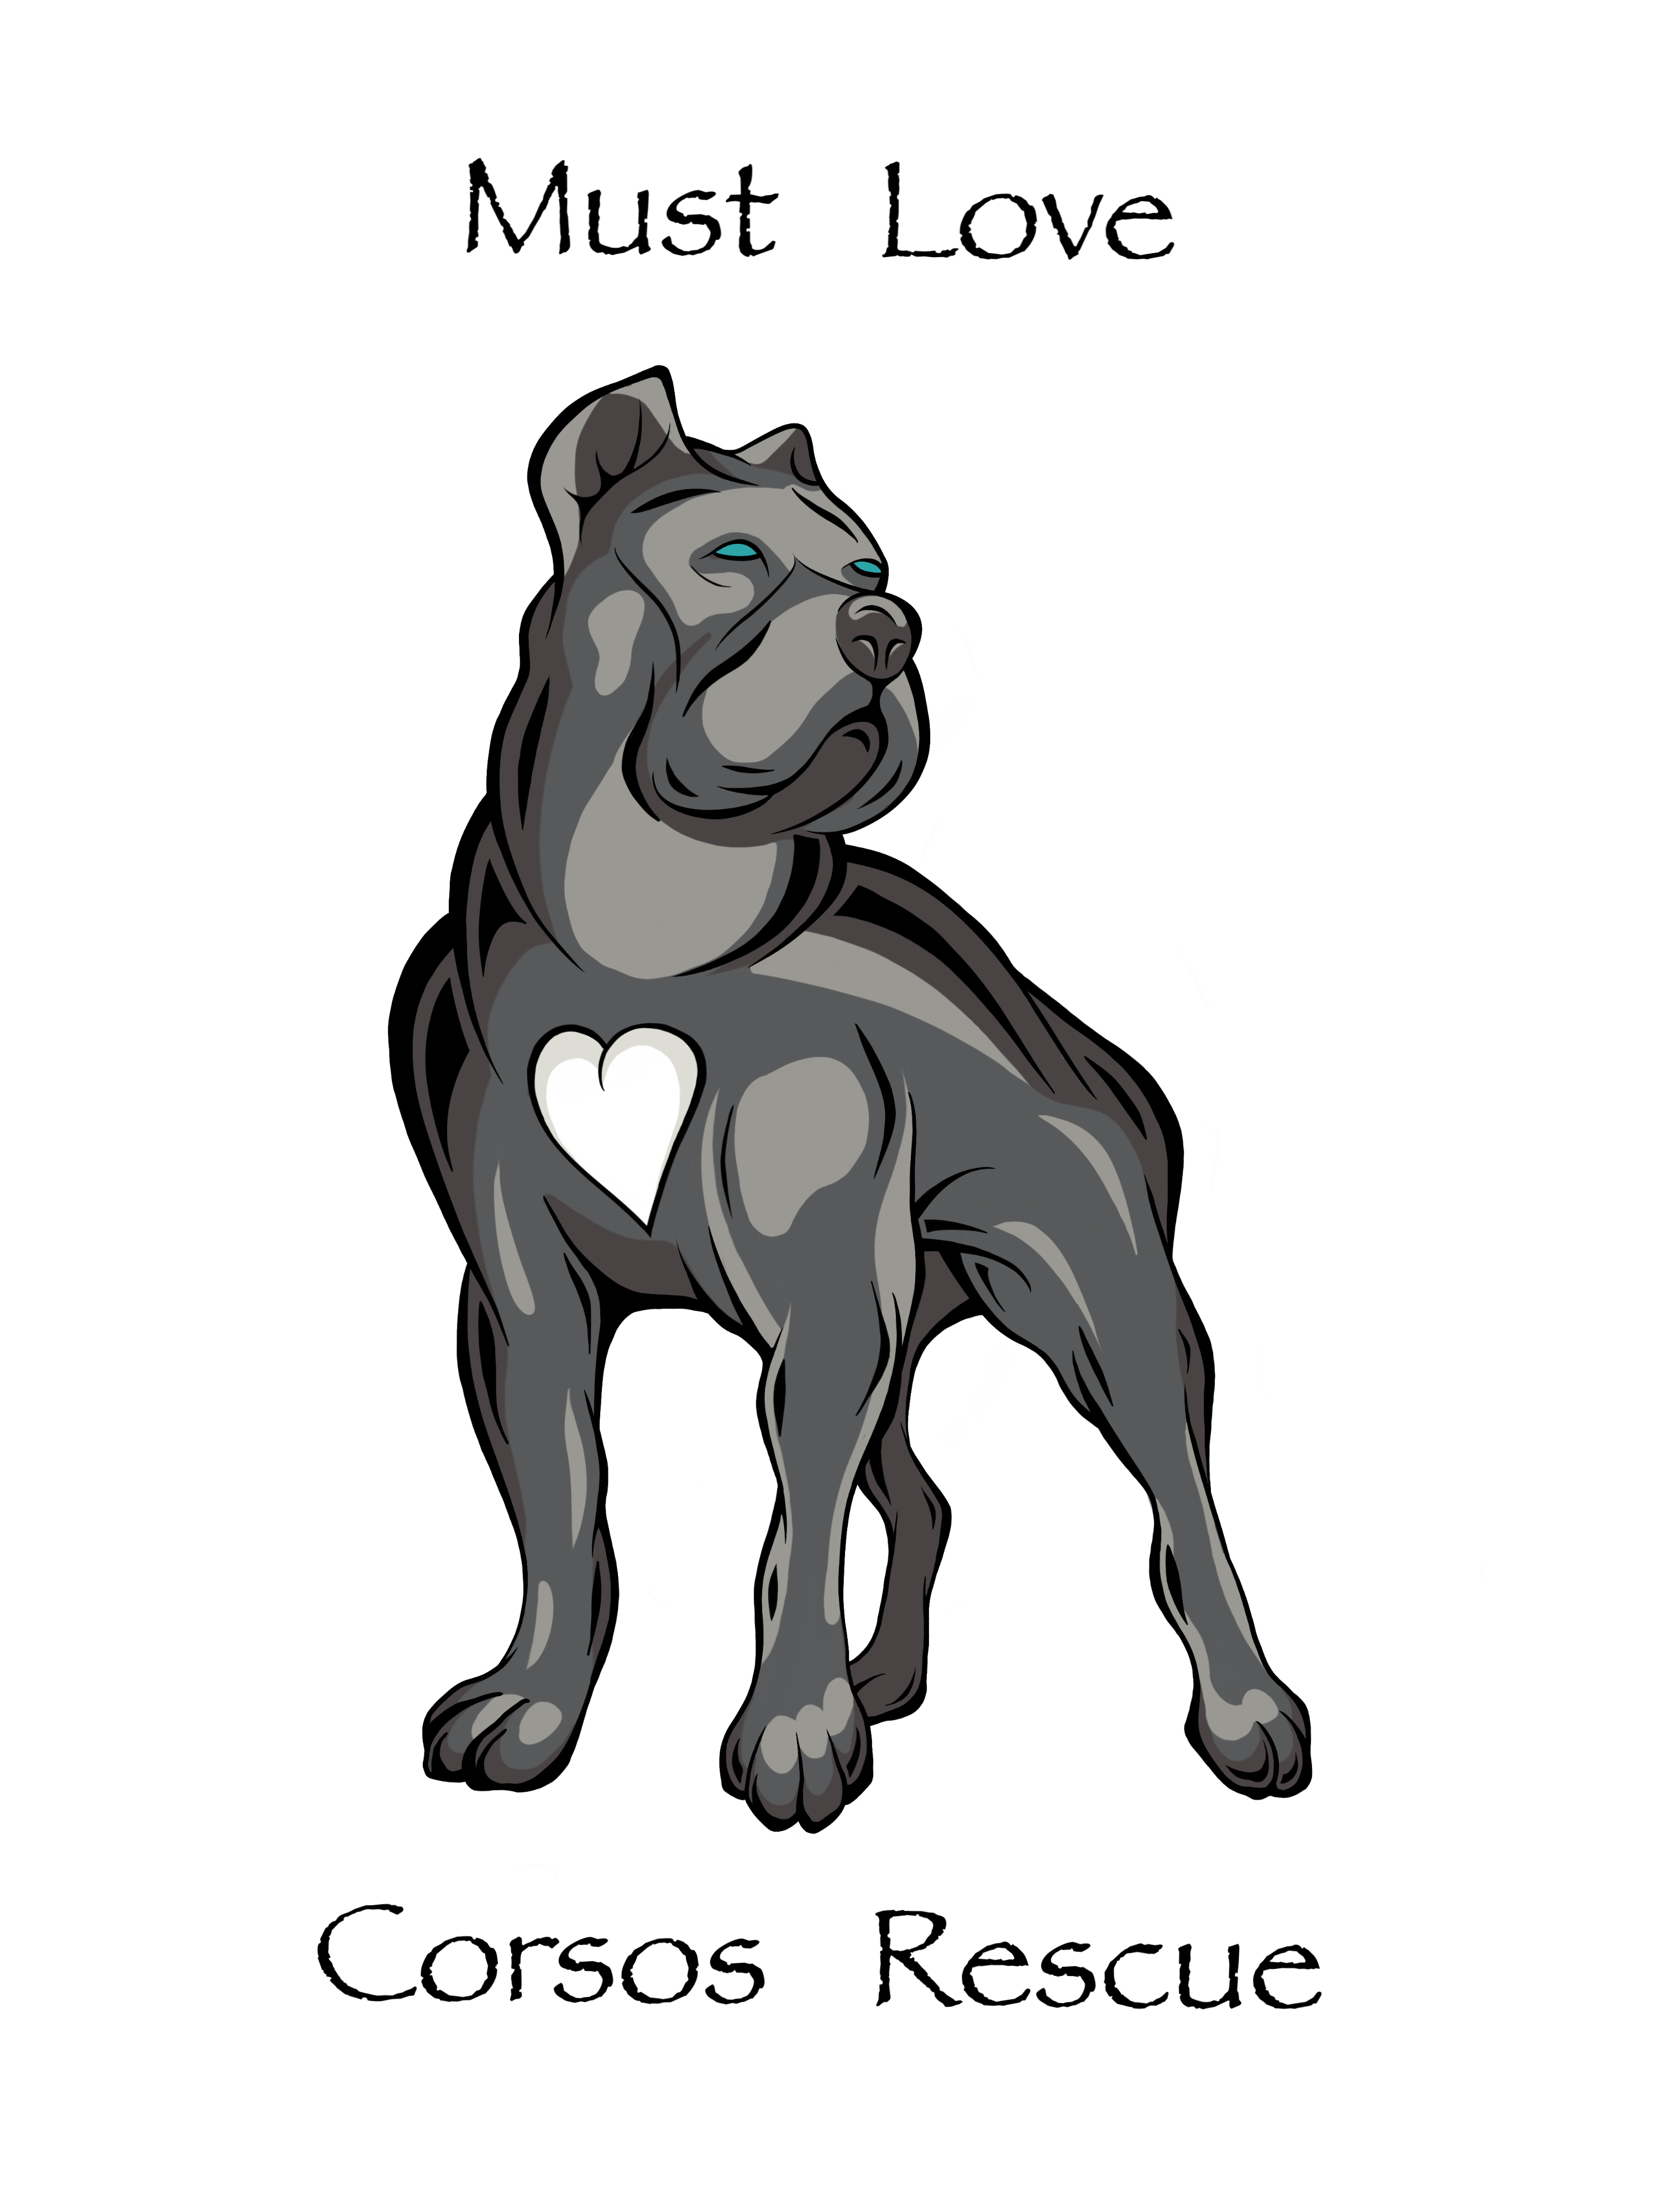 Cane Corso, Rehoming Rescue Dog